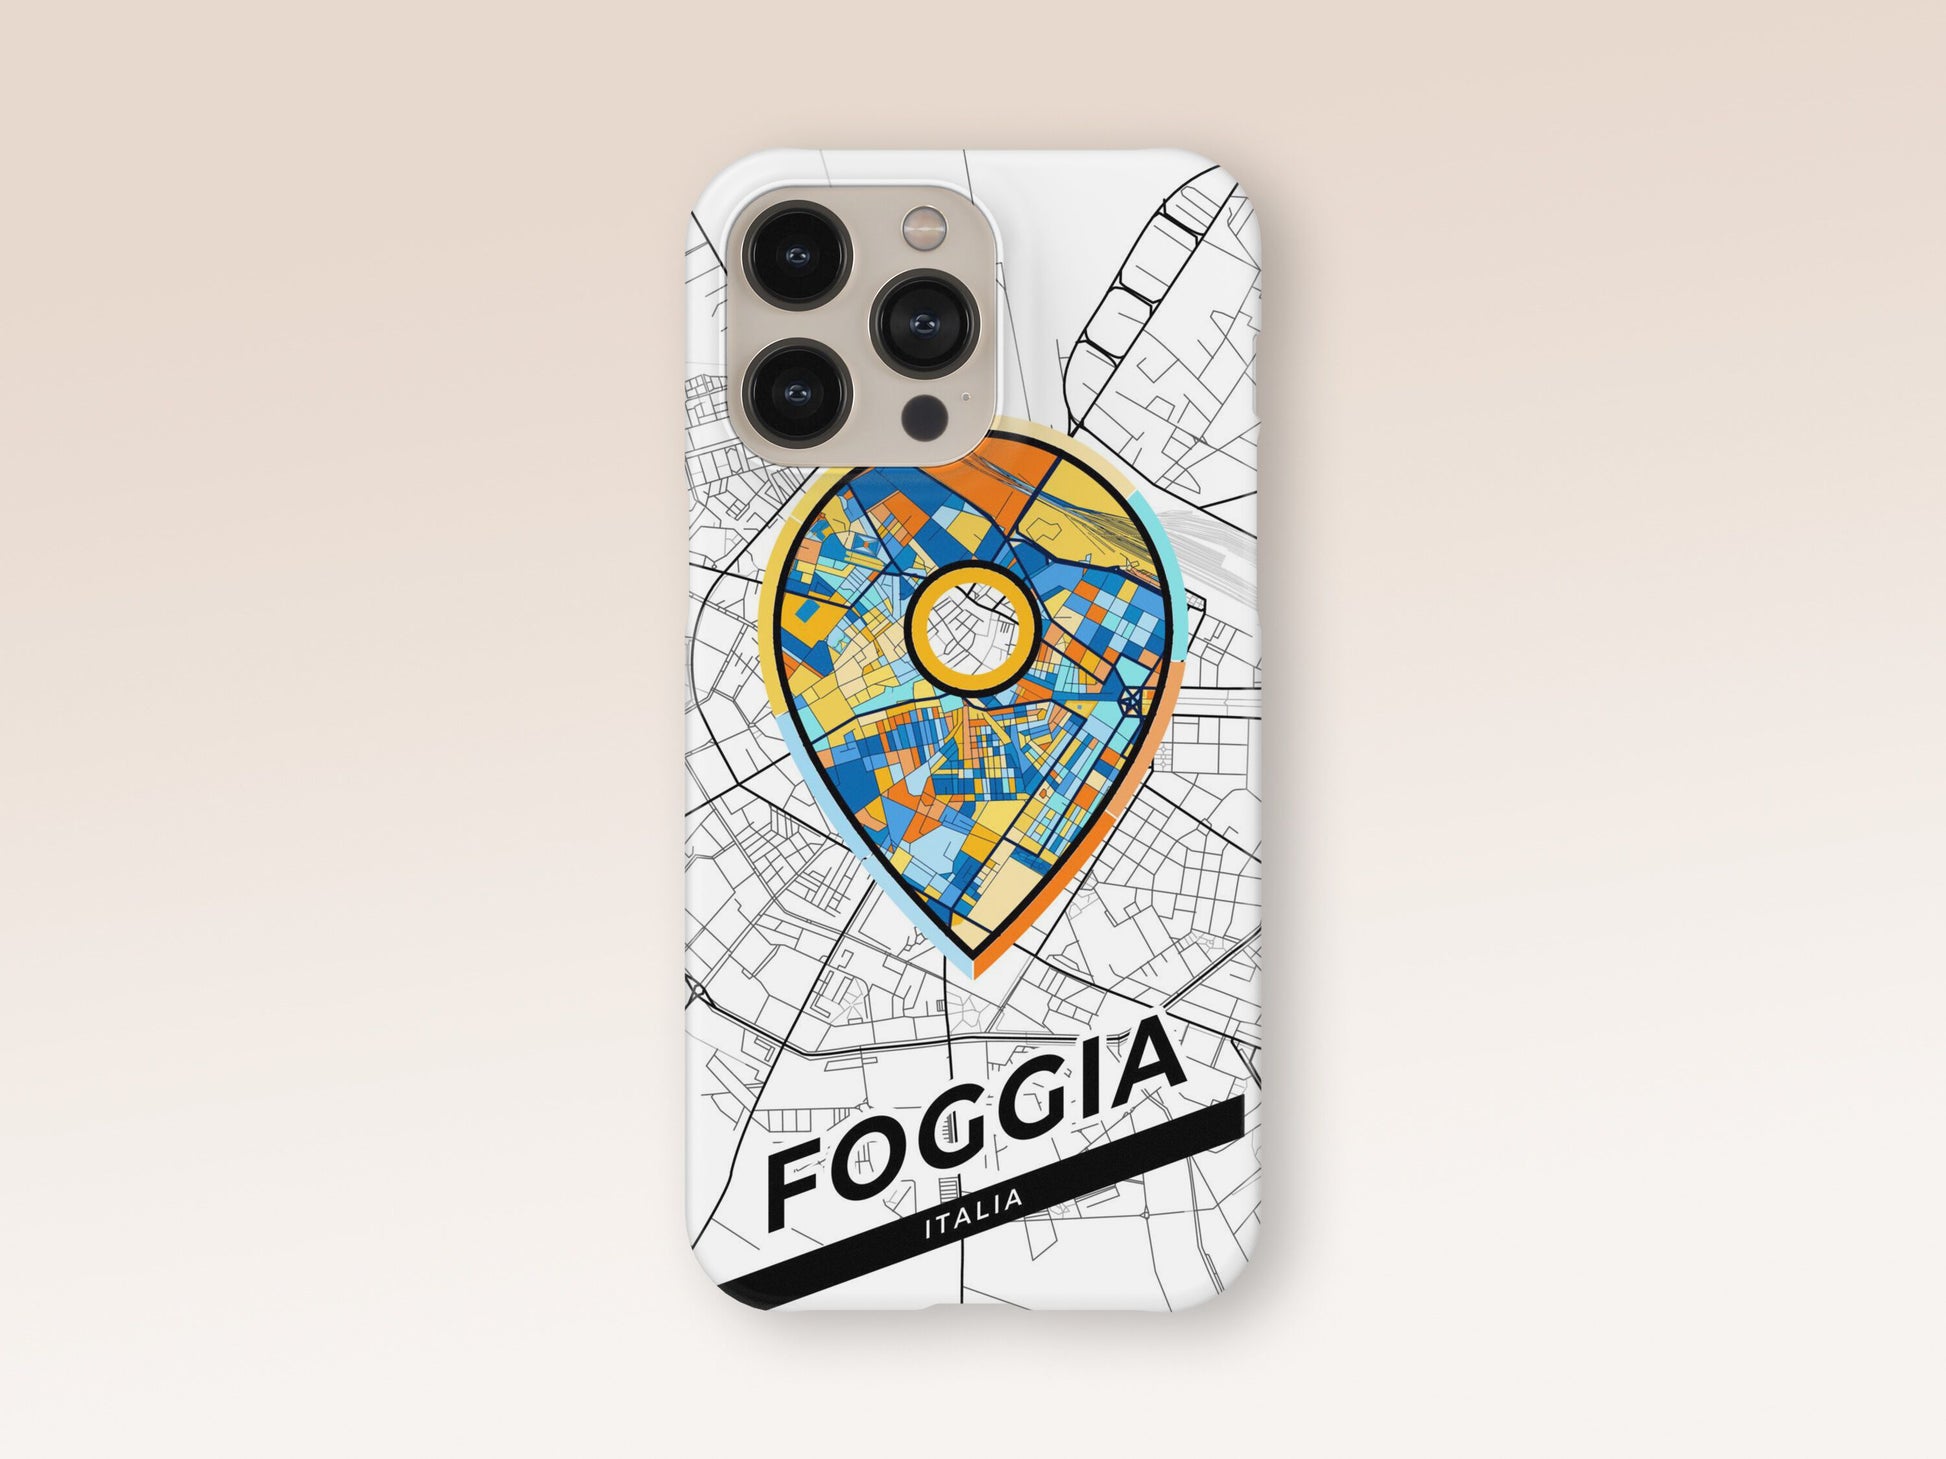 Foggia Italy slim phone case with colorful icon. Birthday, wedding or housewarming gift. Couple match cases. 1